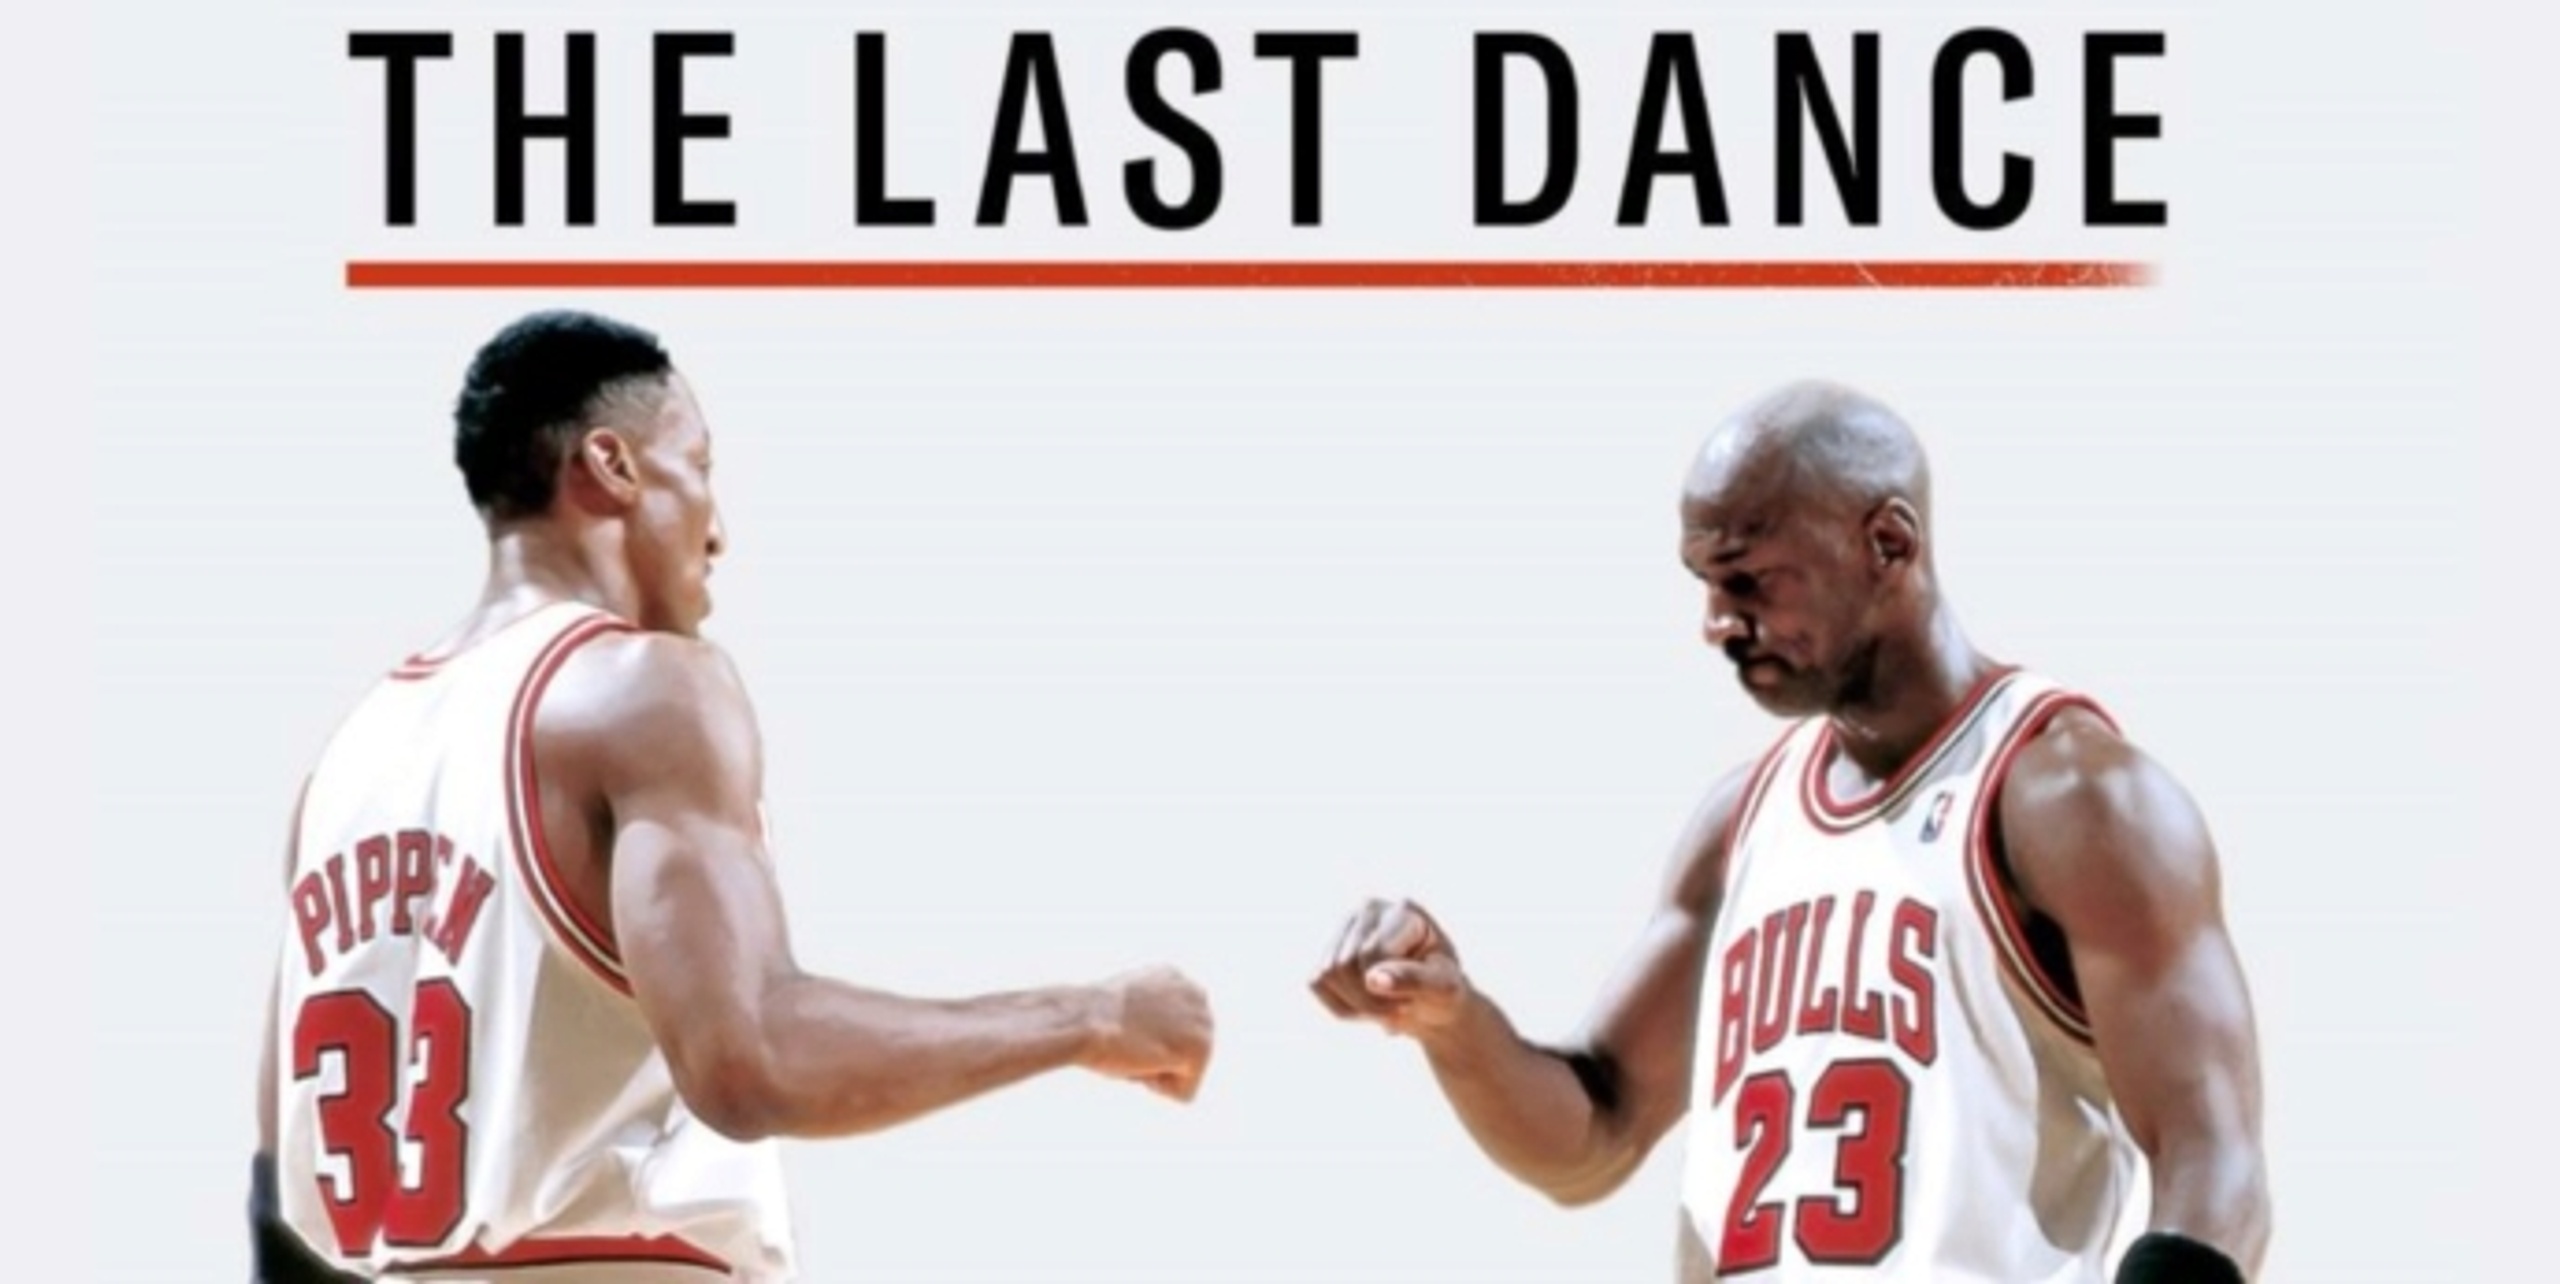 Is "The Last Dance" the greatest sports documentary of all-time?